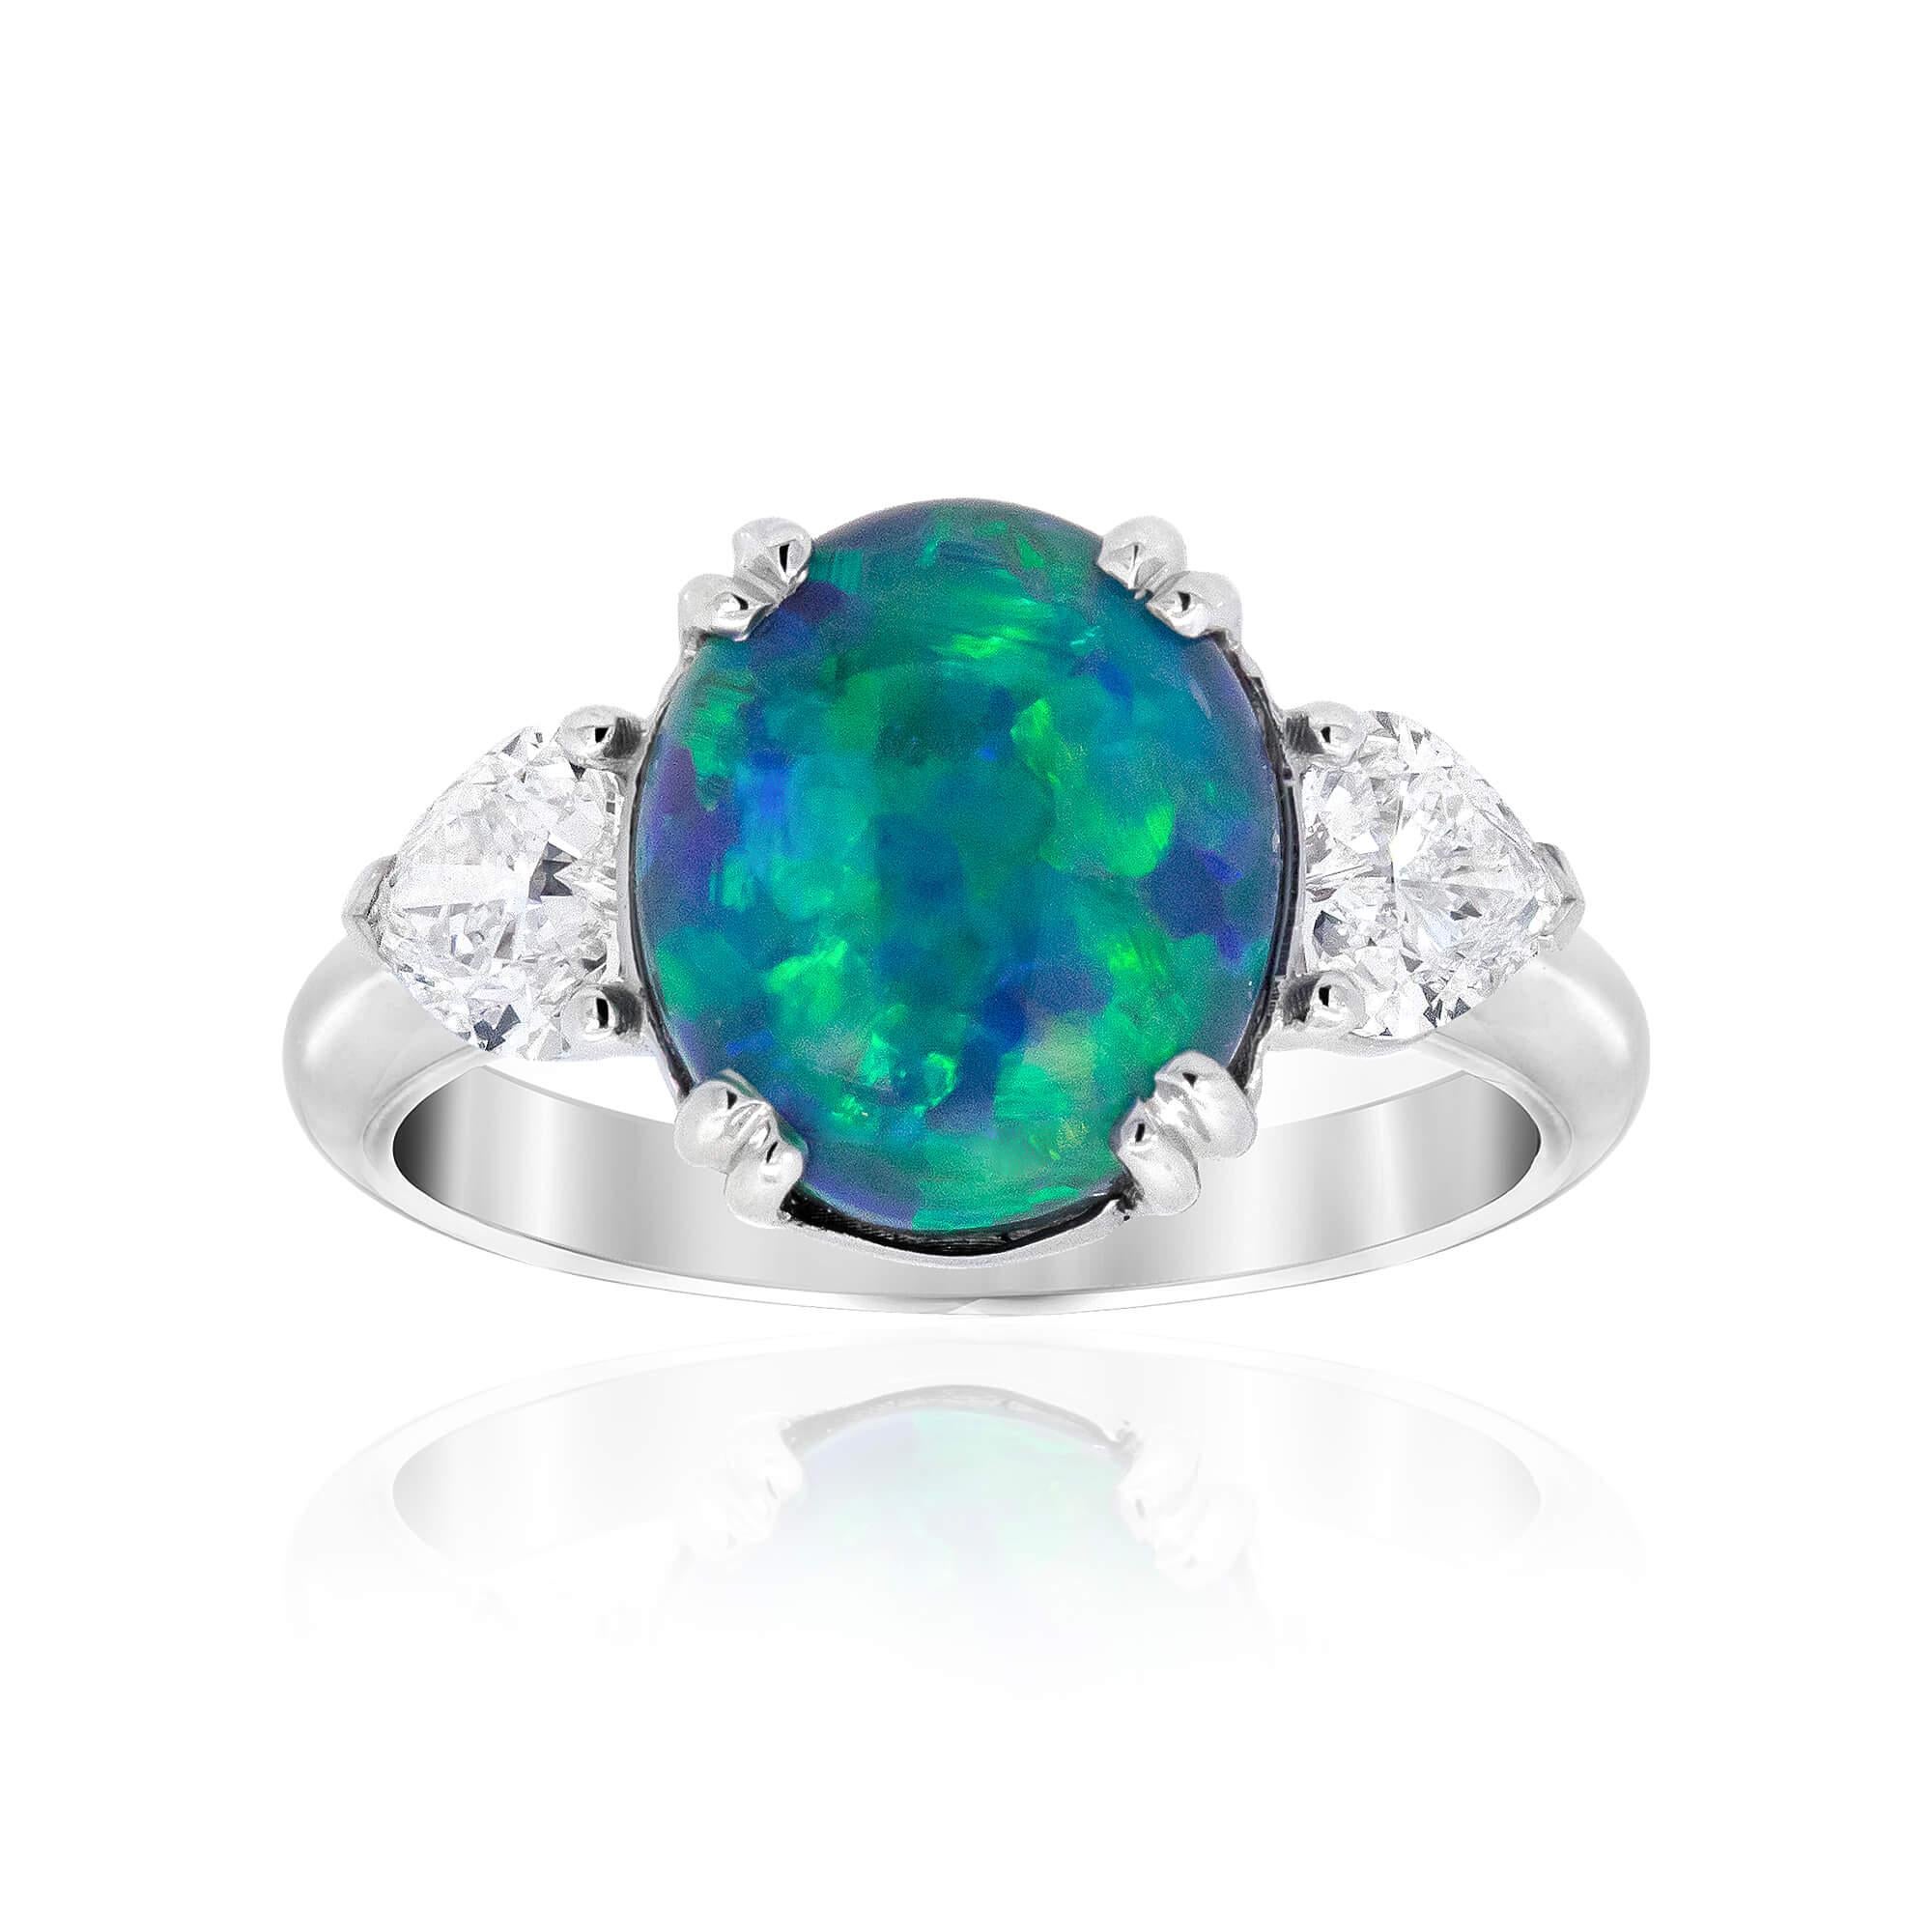 This Cherish Lightning Ridge opal and diamond three-stone ring is a perfect choice for any celebration or that special declaration of love – with a pair of heart shape diamonds providing a gorgeous accent to this phenomenal blue and green opal. The